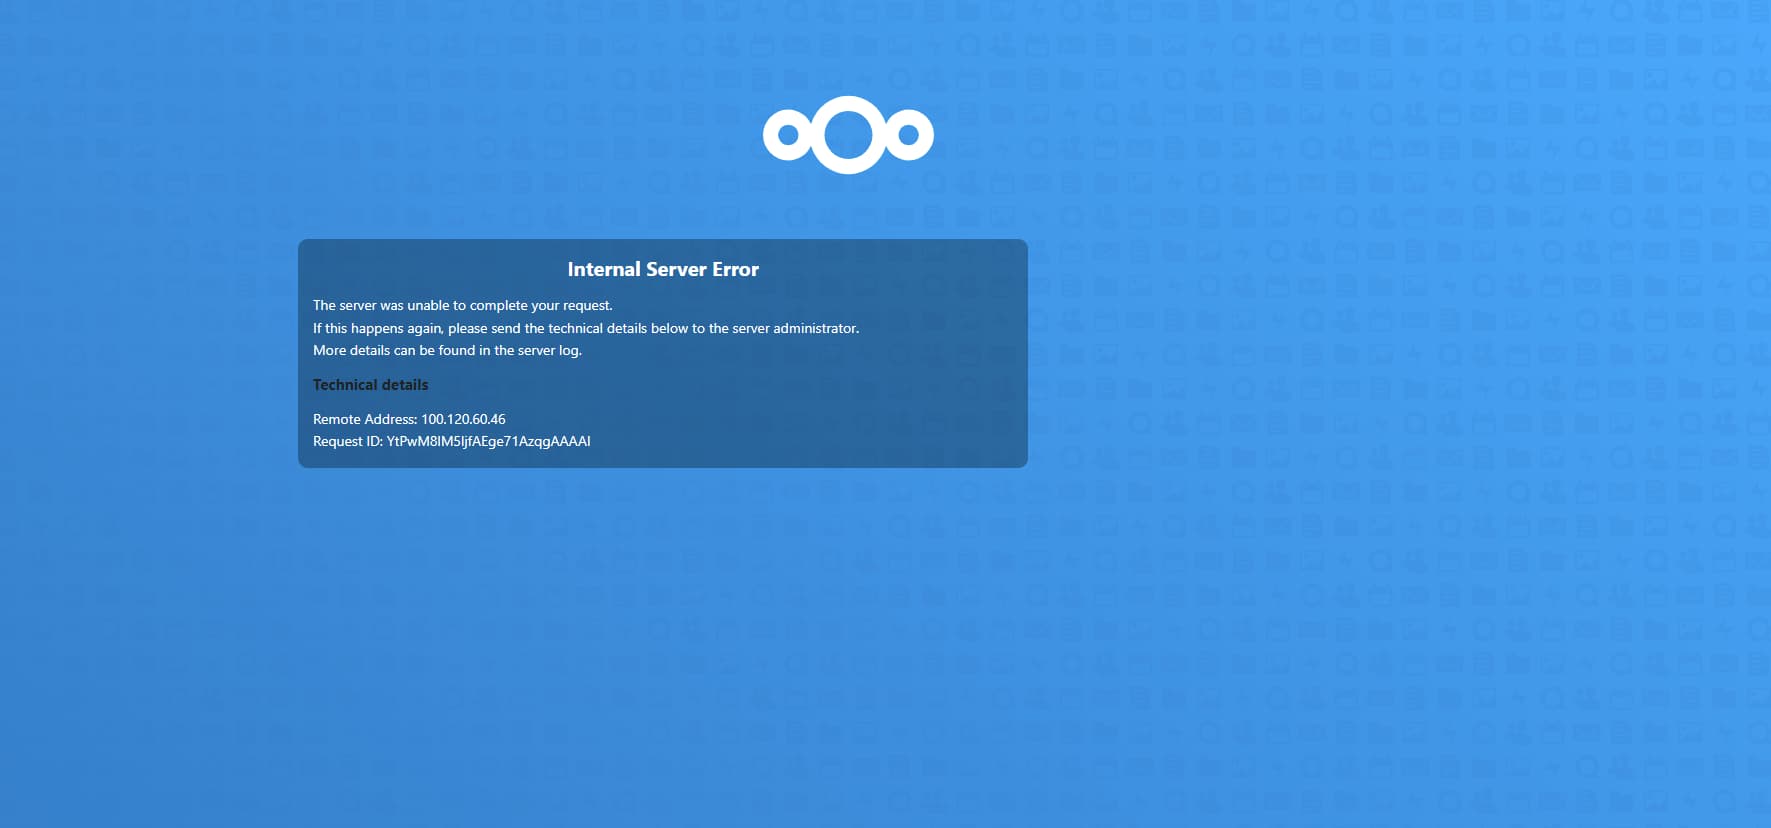 I get a code 7 error when trying to login to Nextcloud from Gnome Online  Accounts - ℹ️ Support - Nextcloud community